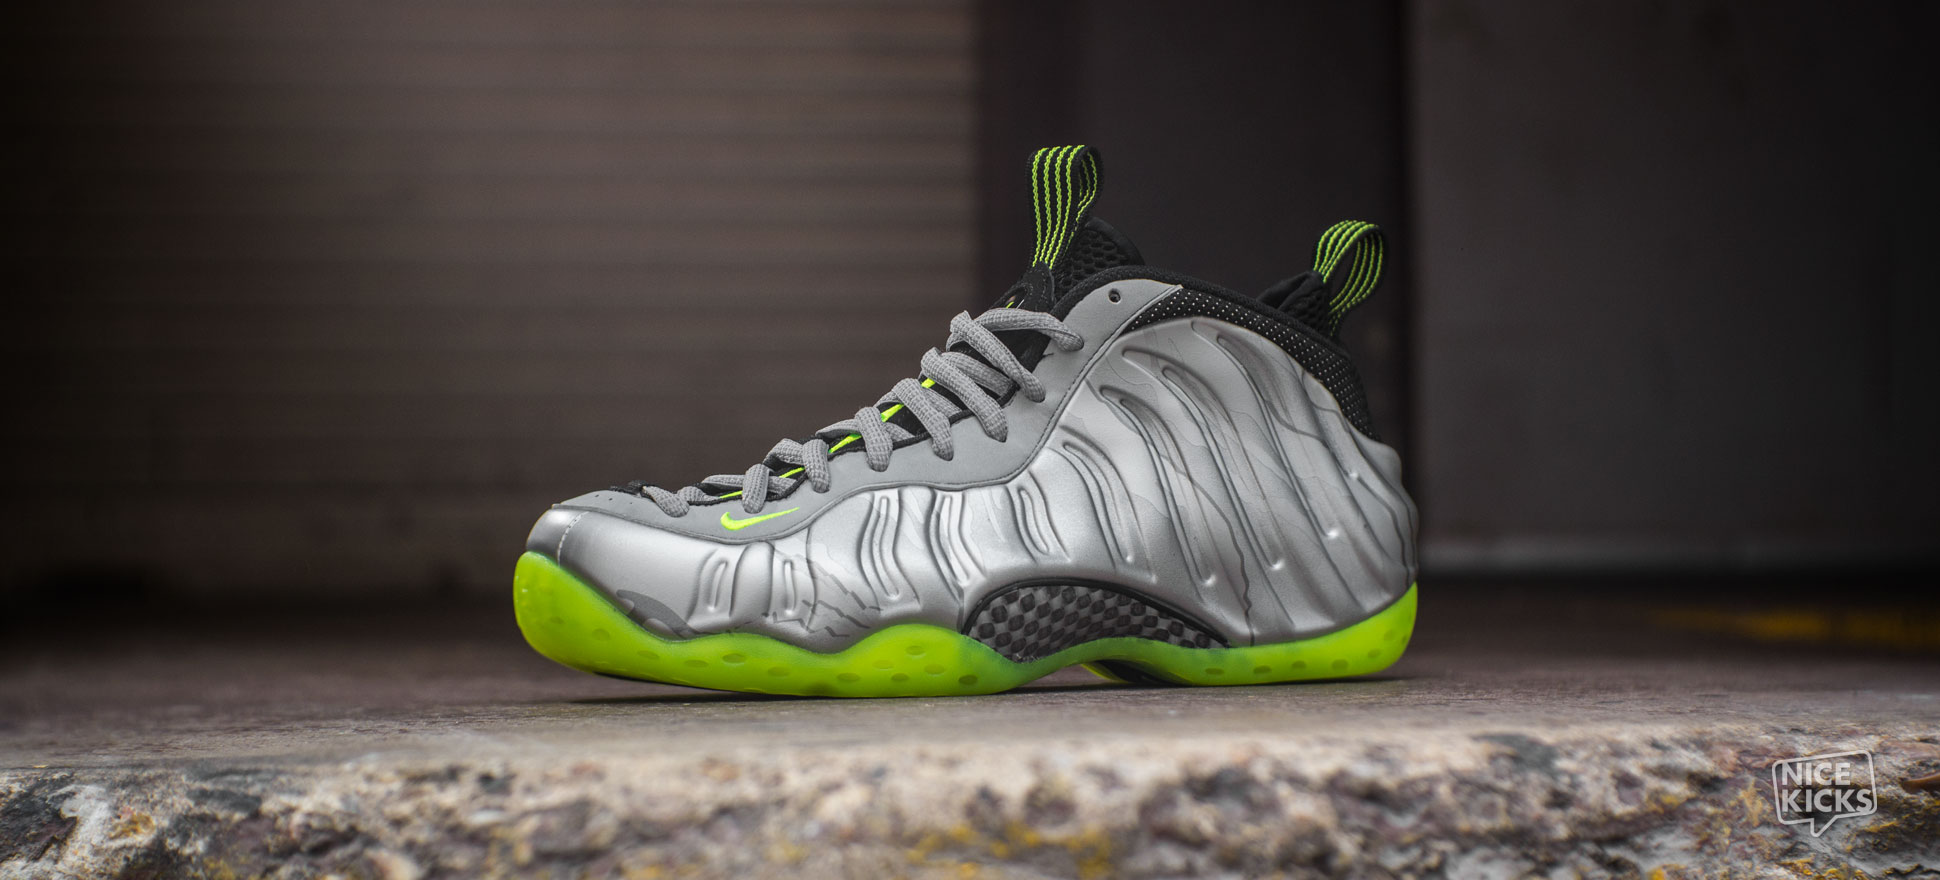 silver and green foamposites